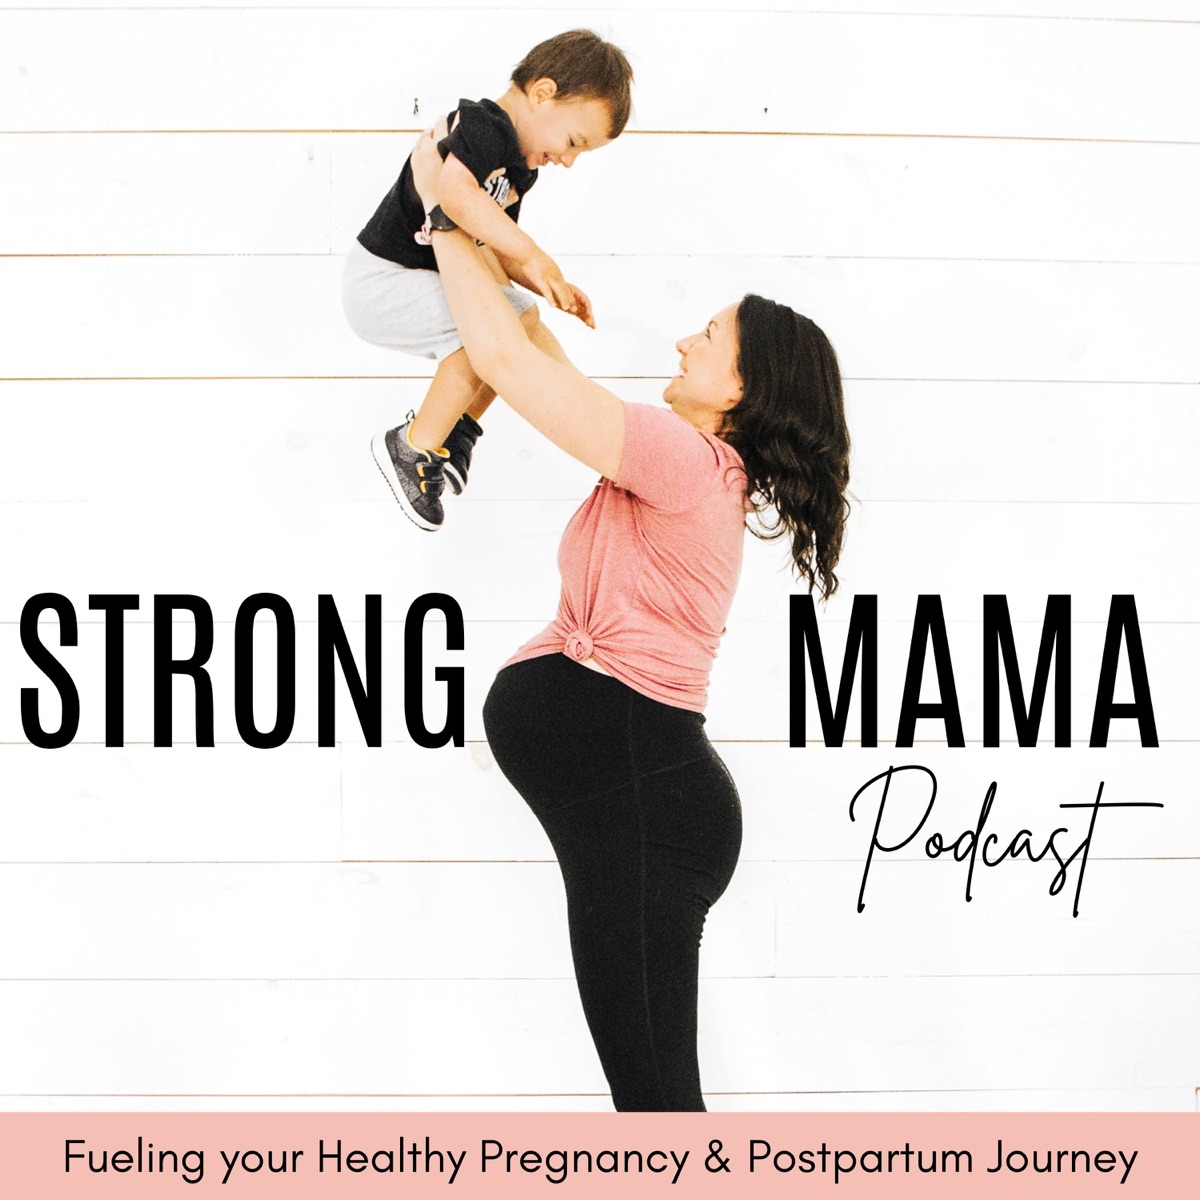 Online Pregnancy and Postnatal Exercise Classes Available in NZ